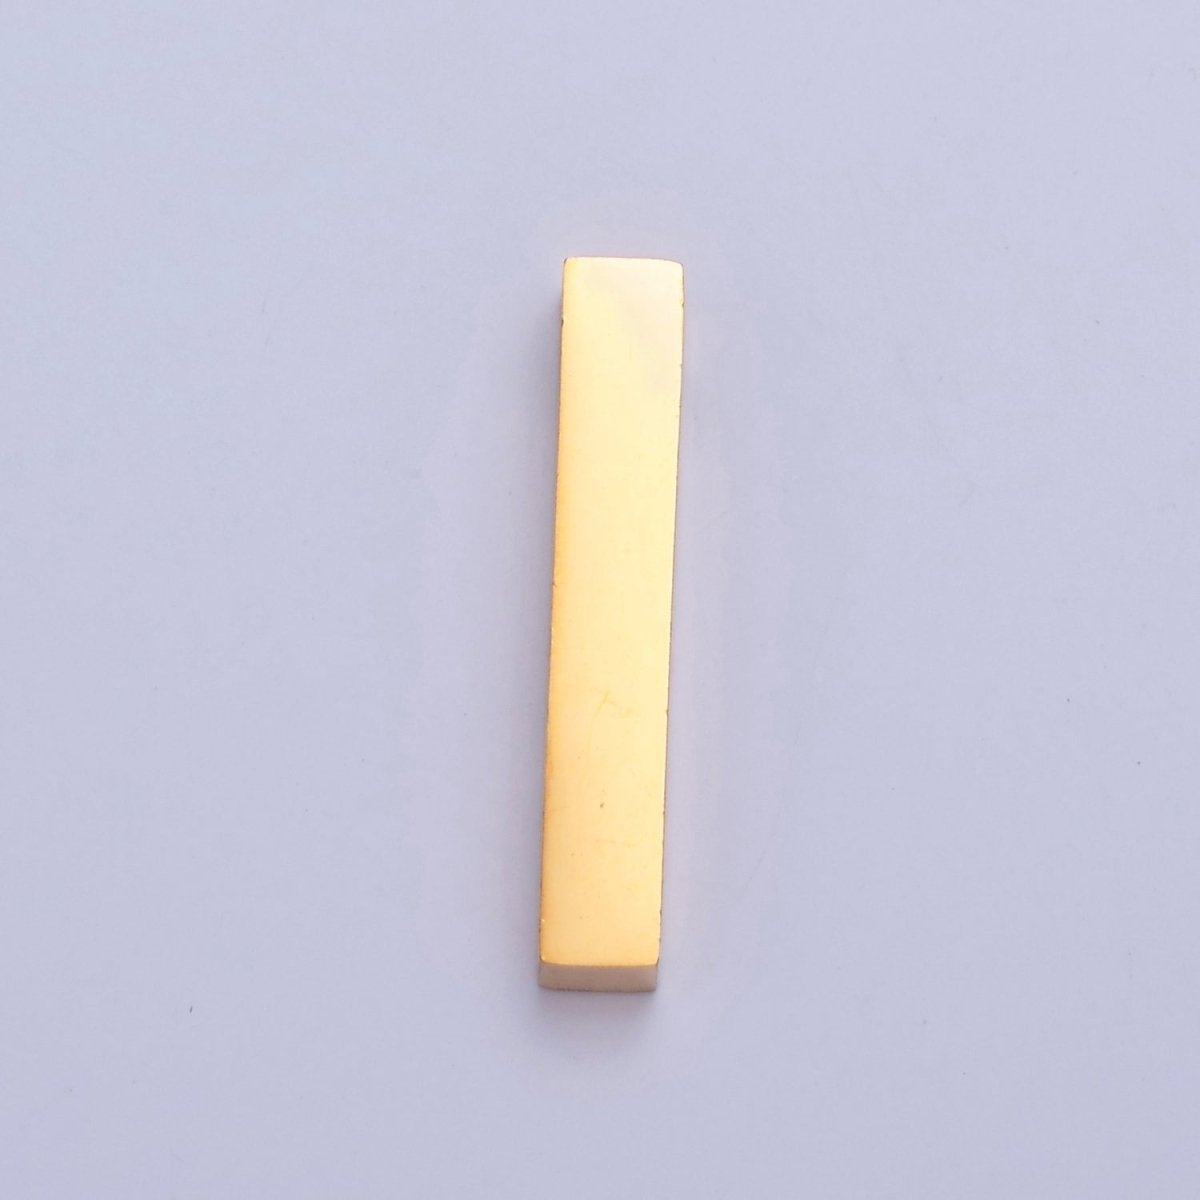 19.7mmx3.2mm Long Tube Bead Spacer For Jewelry Making, W-835 W-836 - DLUXCA